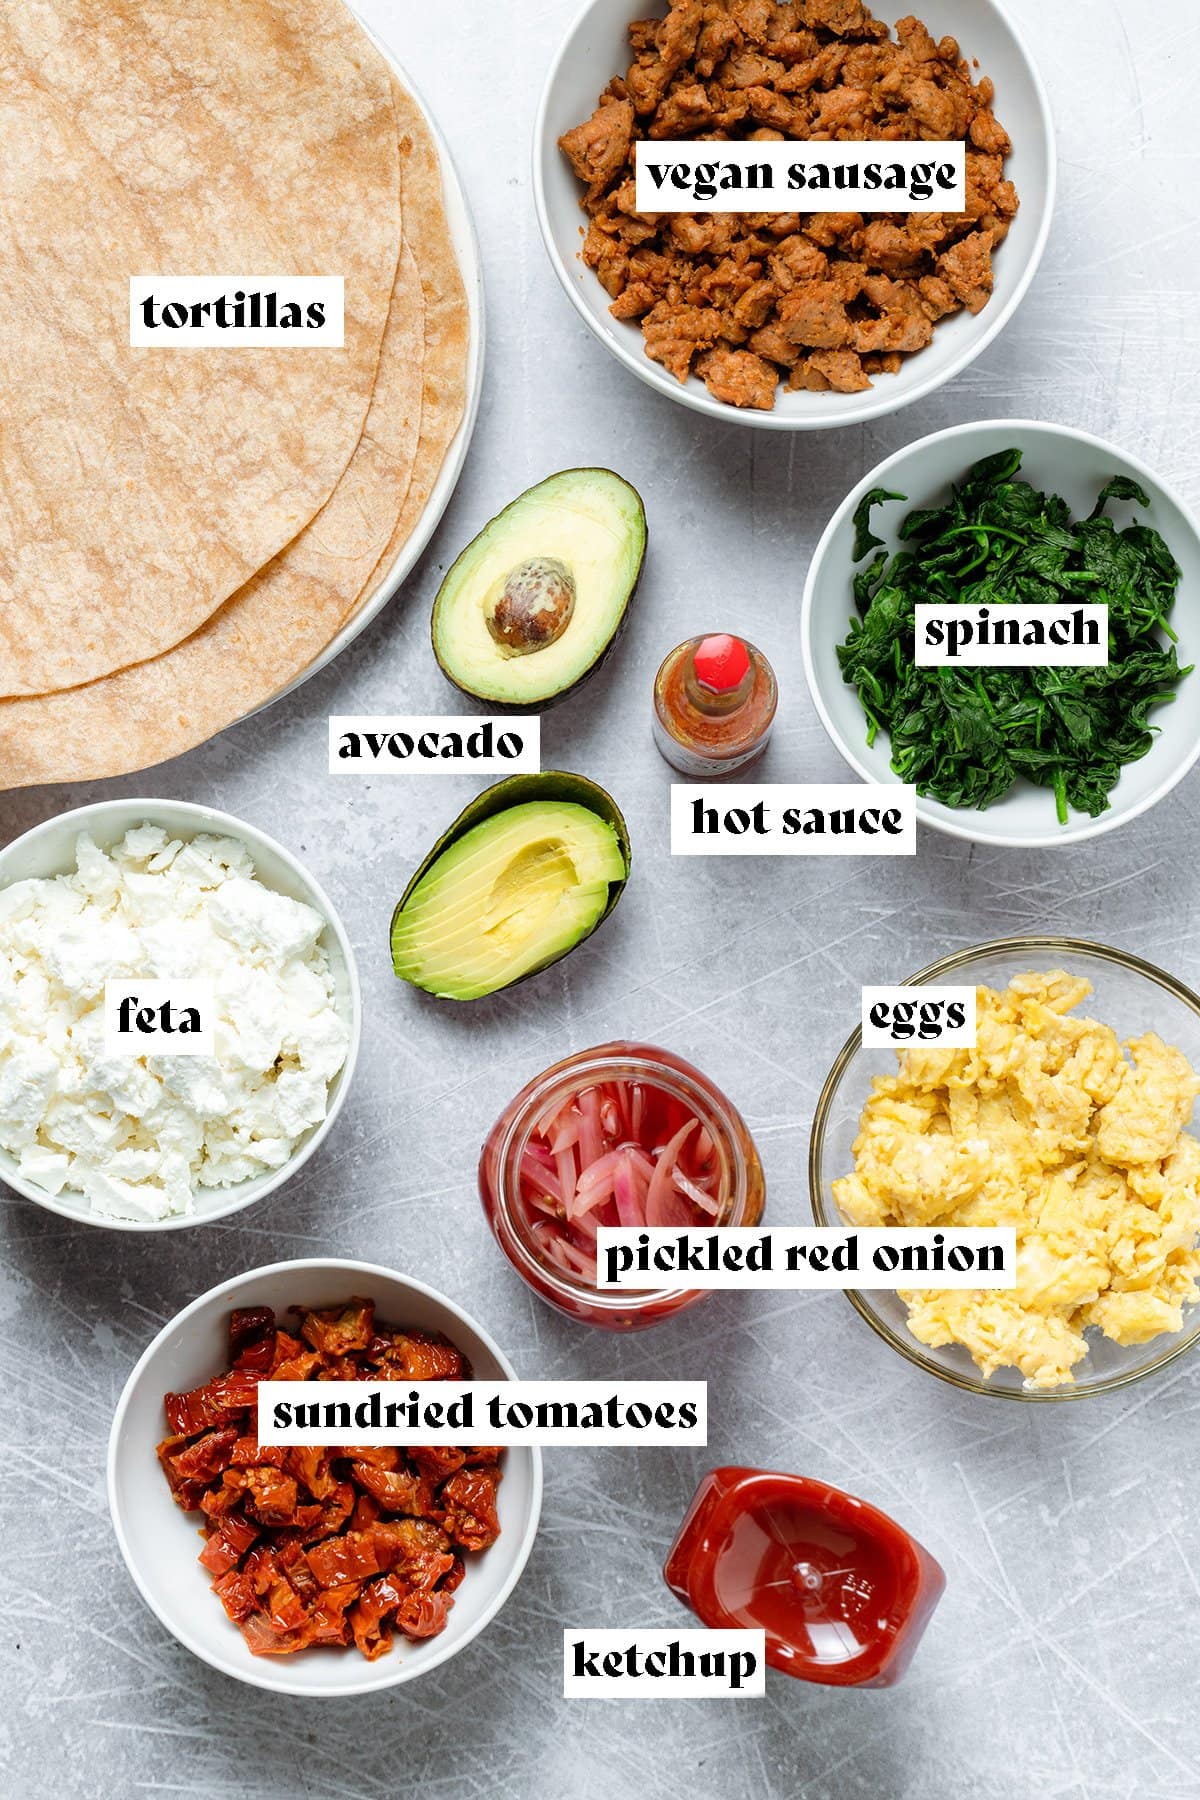 Ingredients like tortilla wraps, feta, spinach, and scrambled eggs laid out in bowls on metal background.